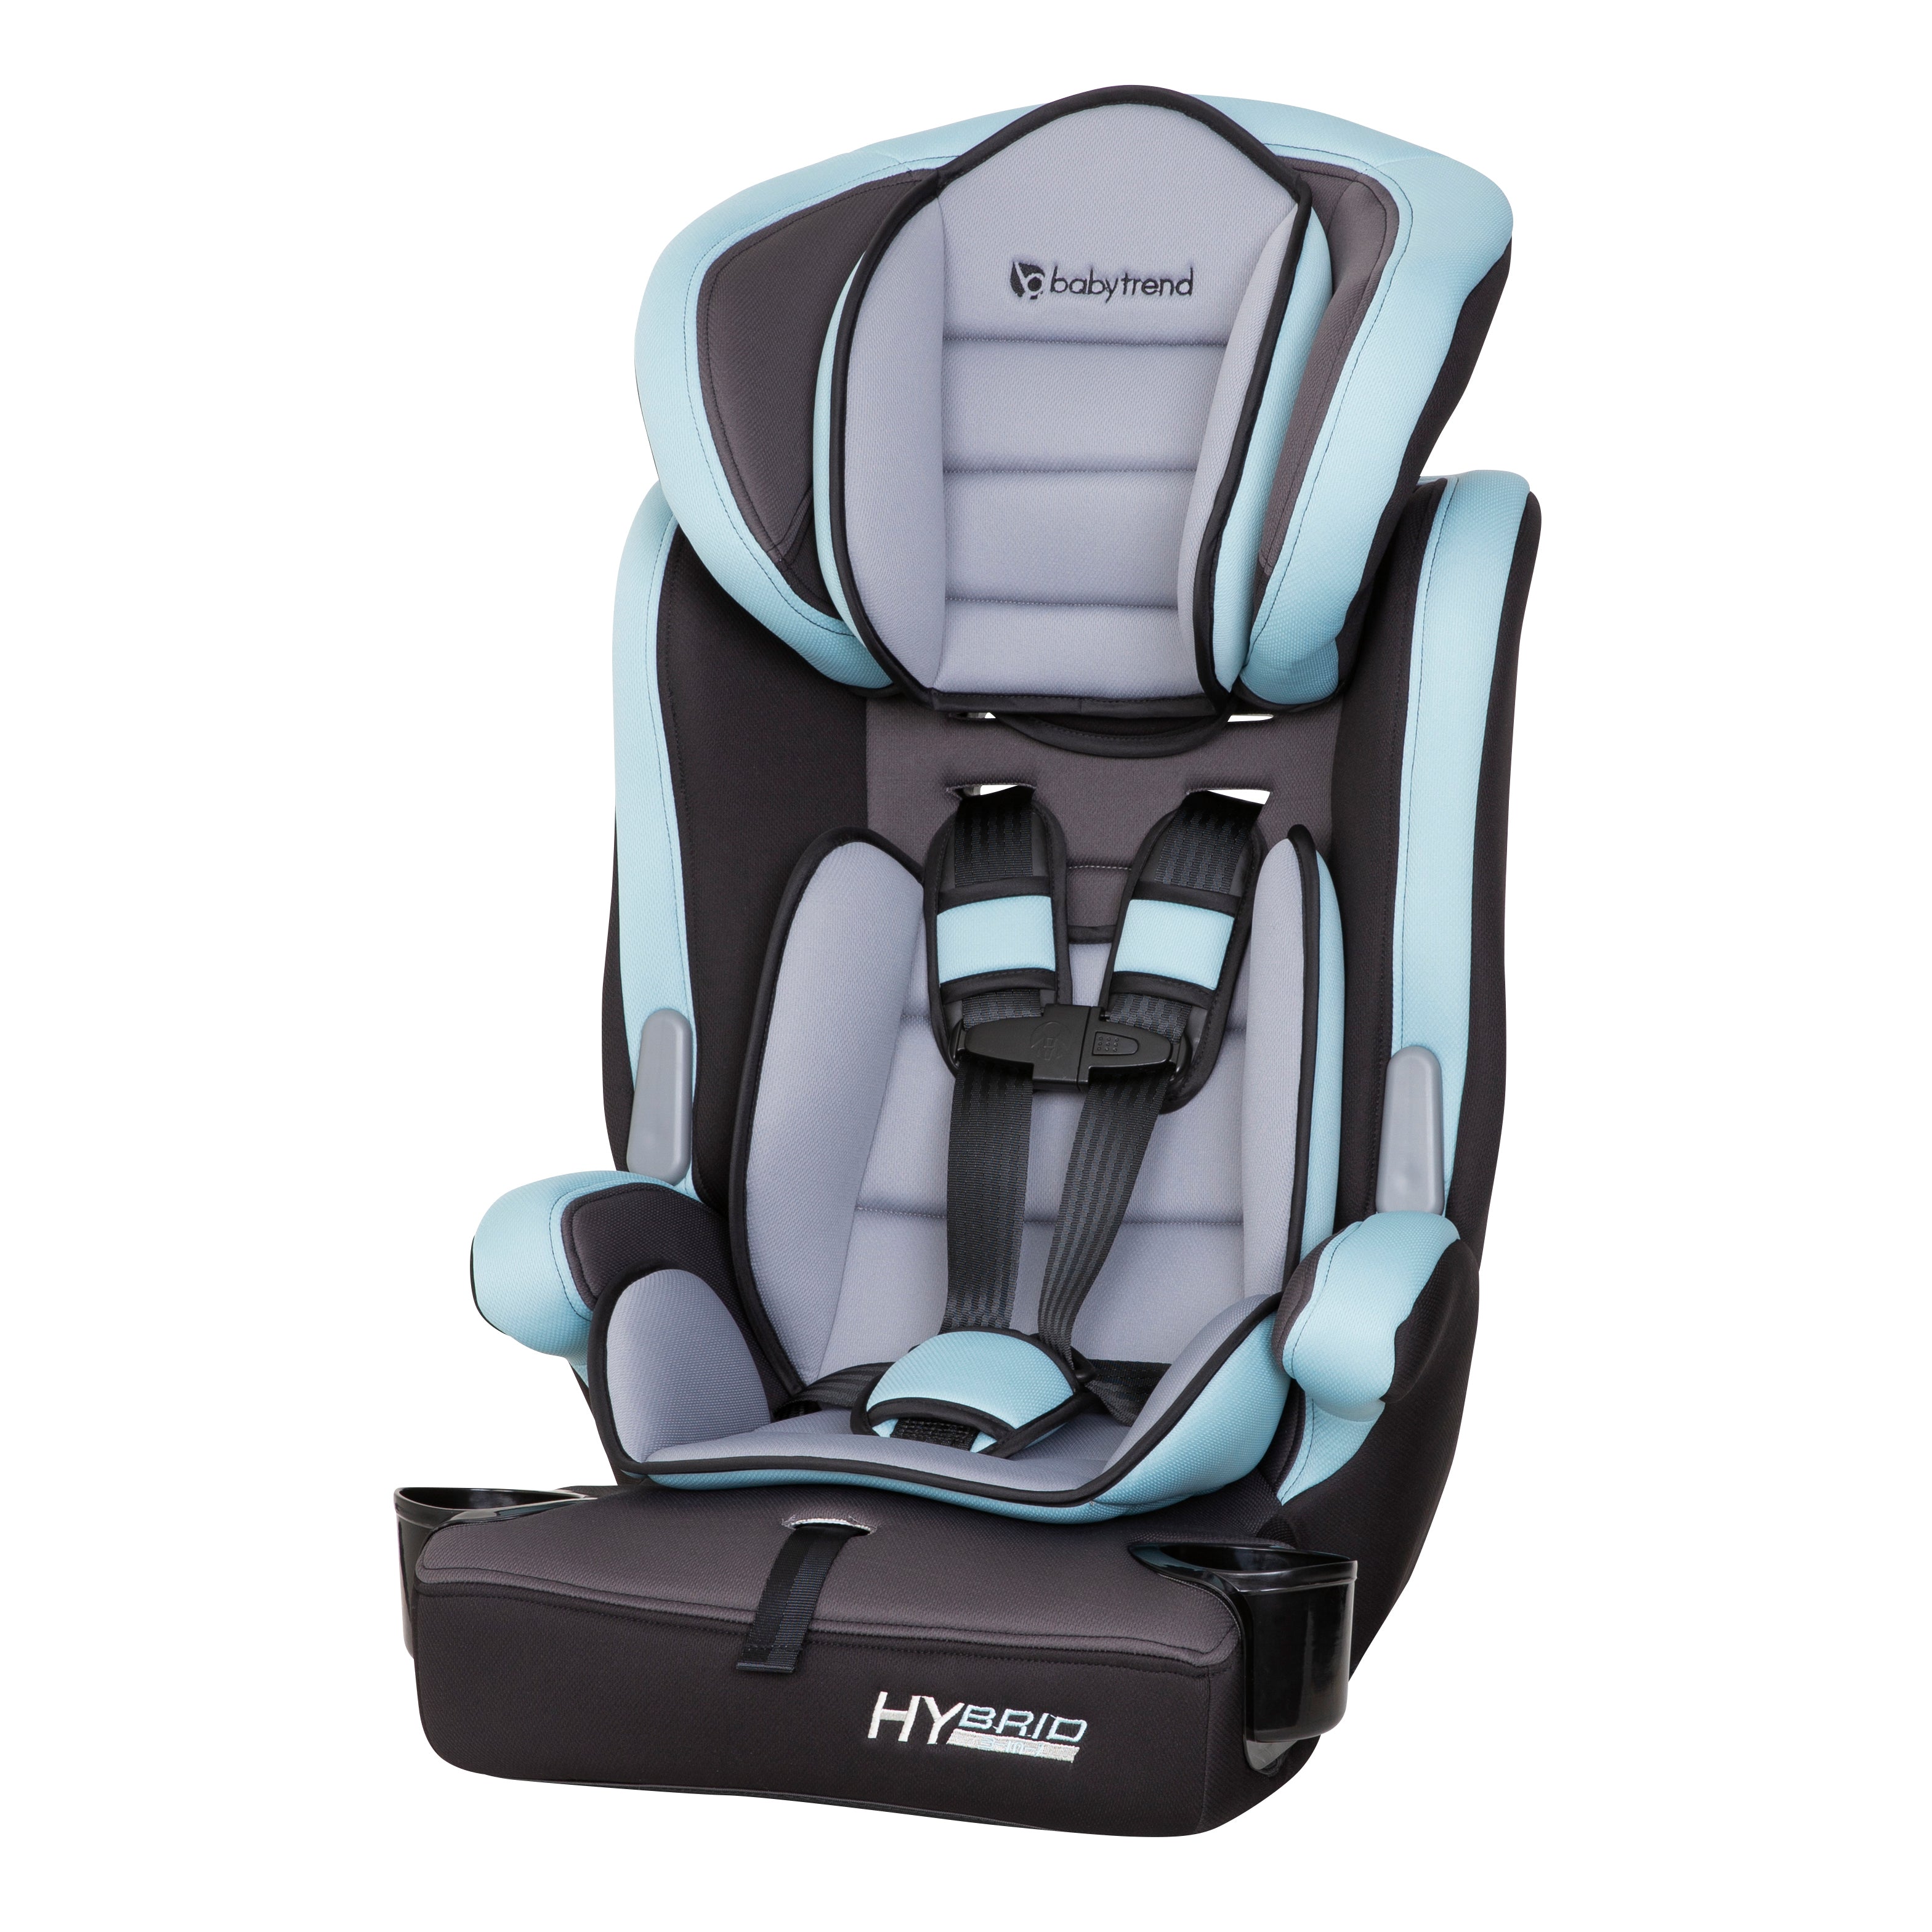 Baby Trend Hybrid™ 3-in-1 Combination Booster Car Seat - Desert Blue -  Walmart Exclusive - FB49E14A